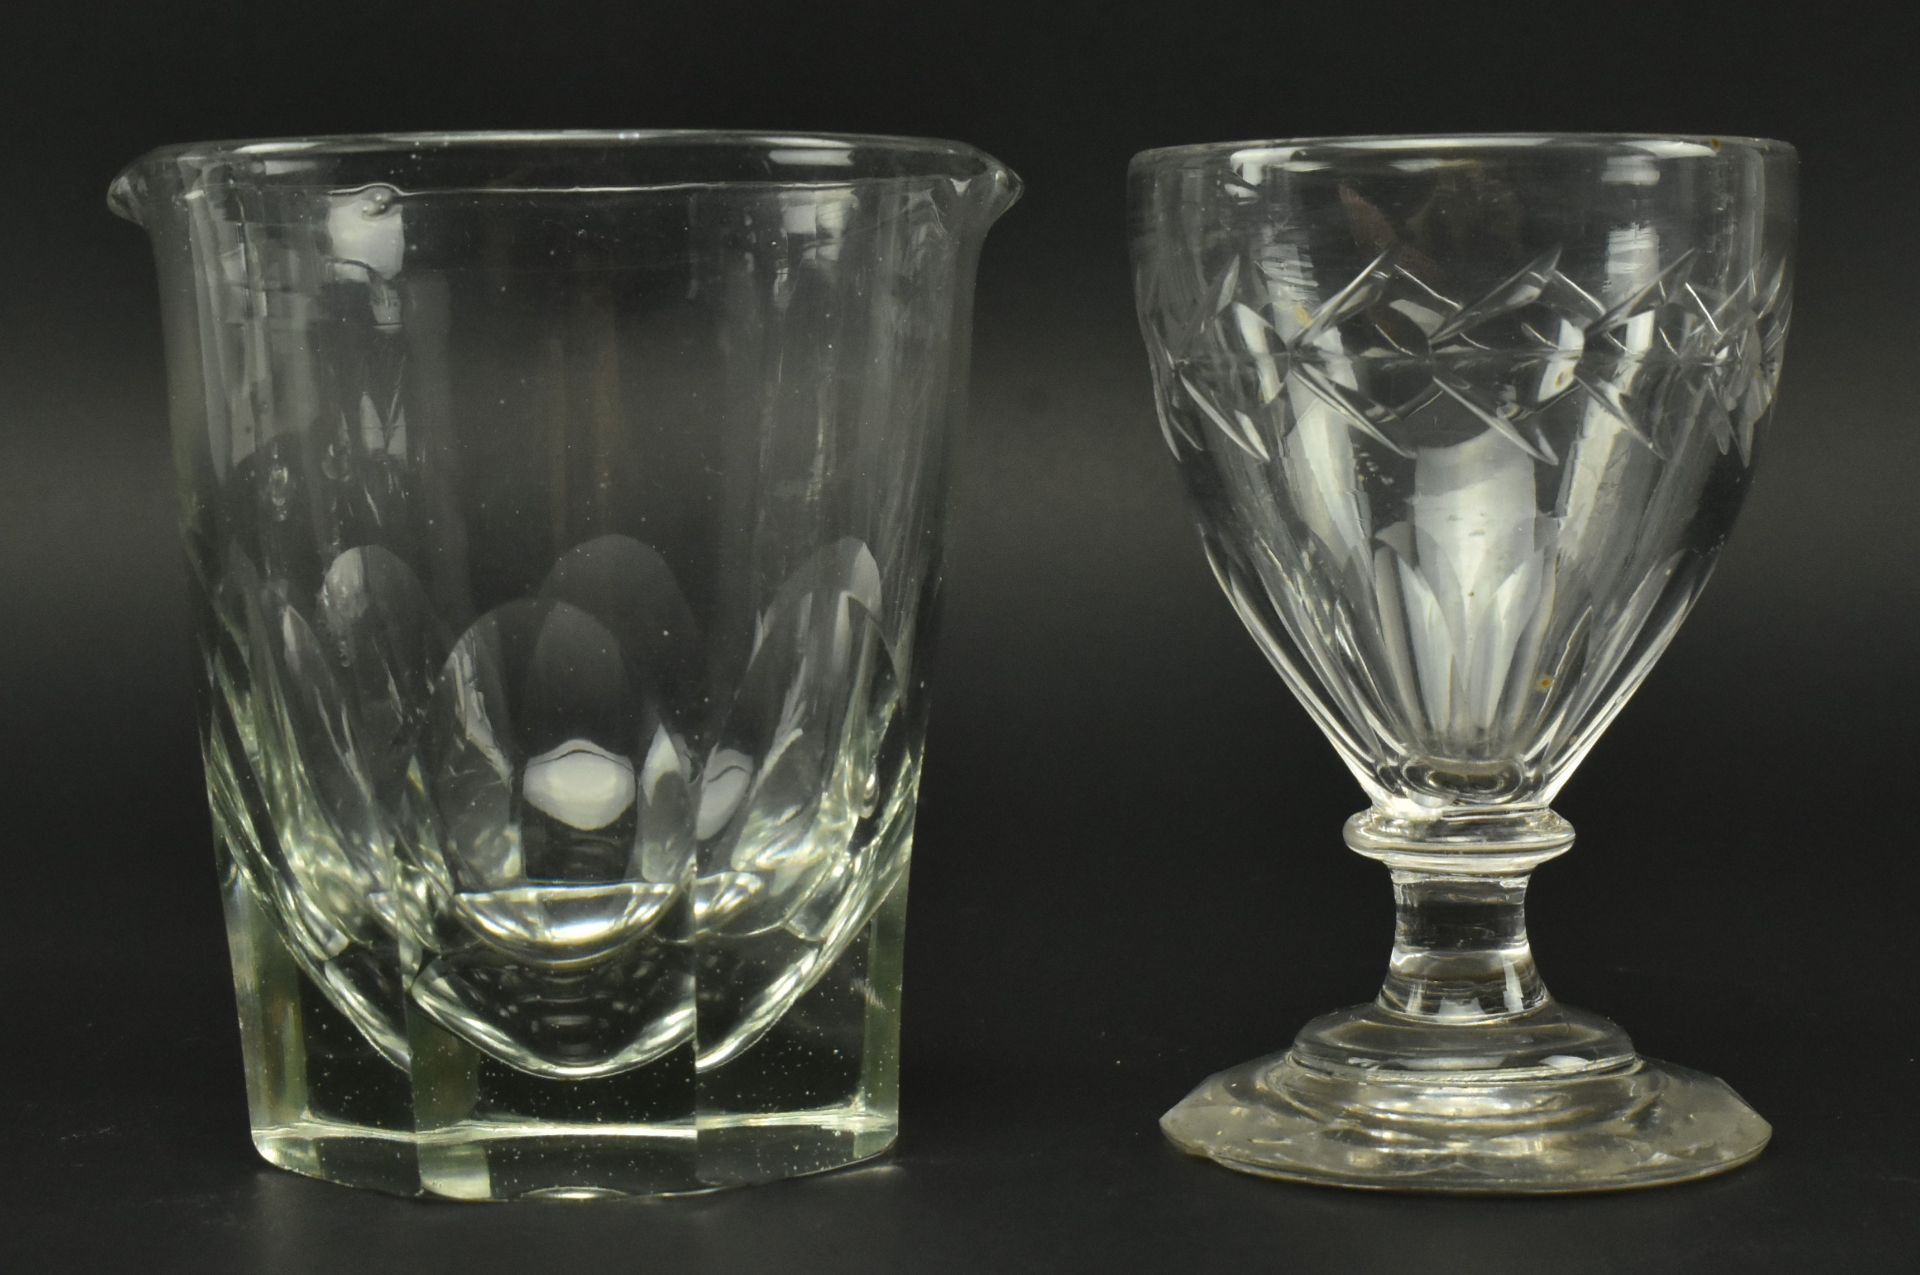 COLLECTION OF 19TH CENTURY CUT GLASSWARE - Image 2 of 8